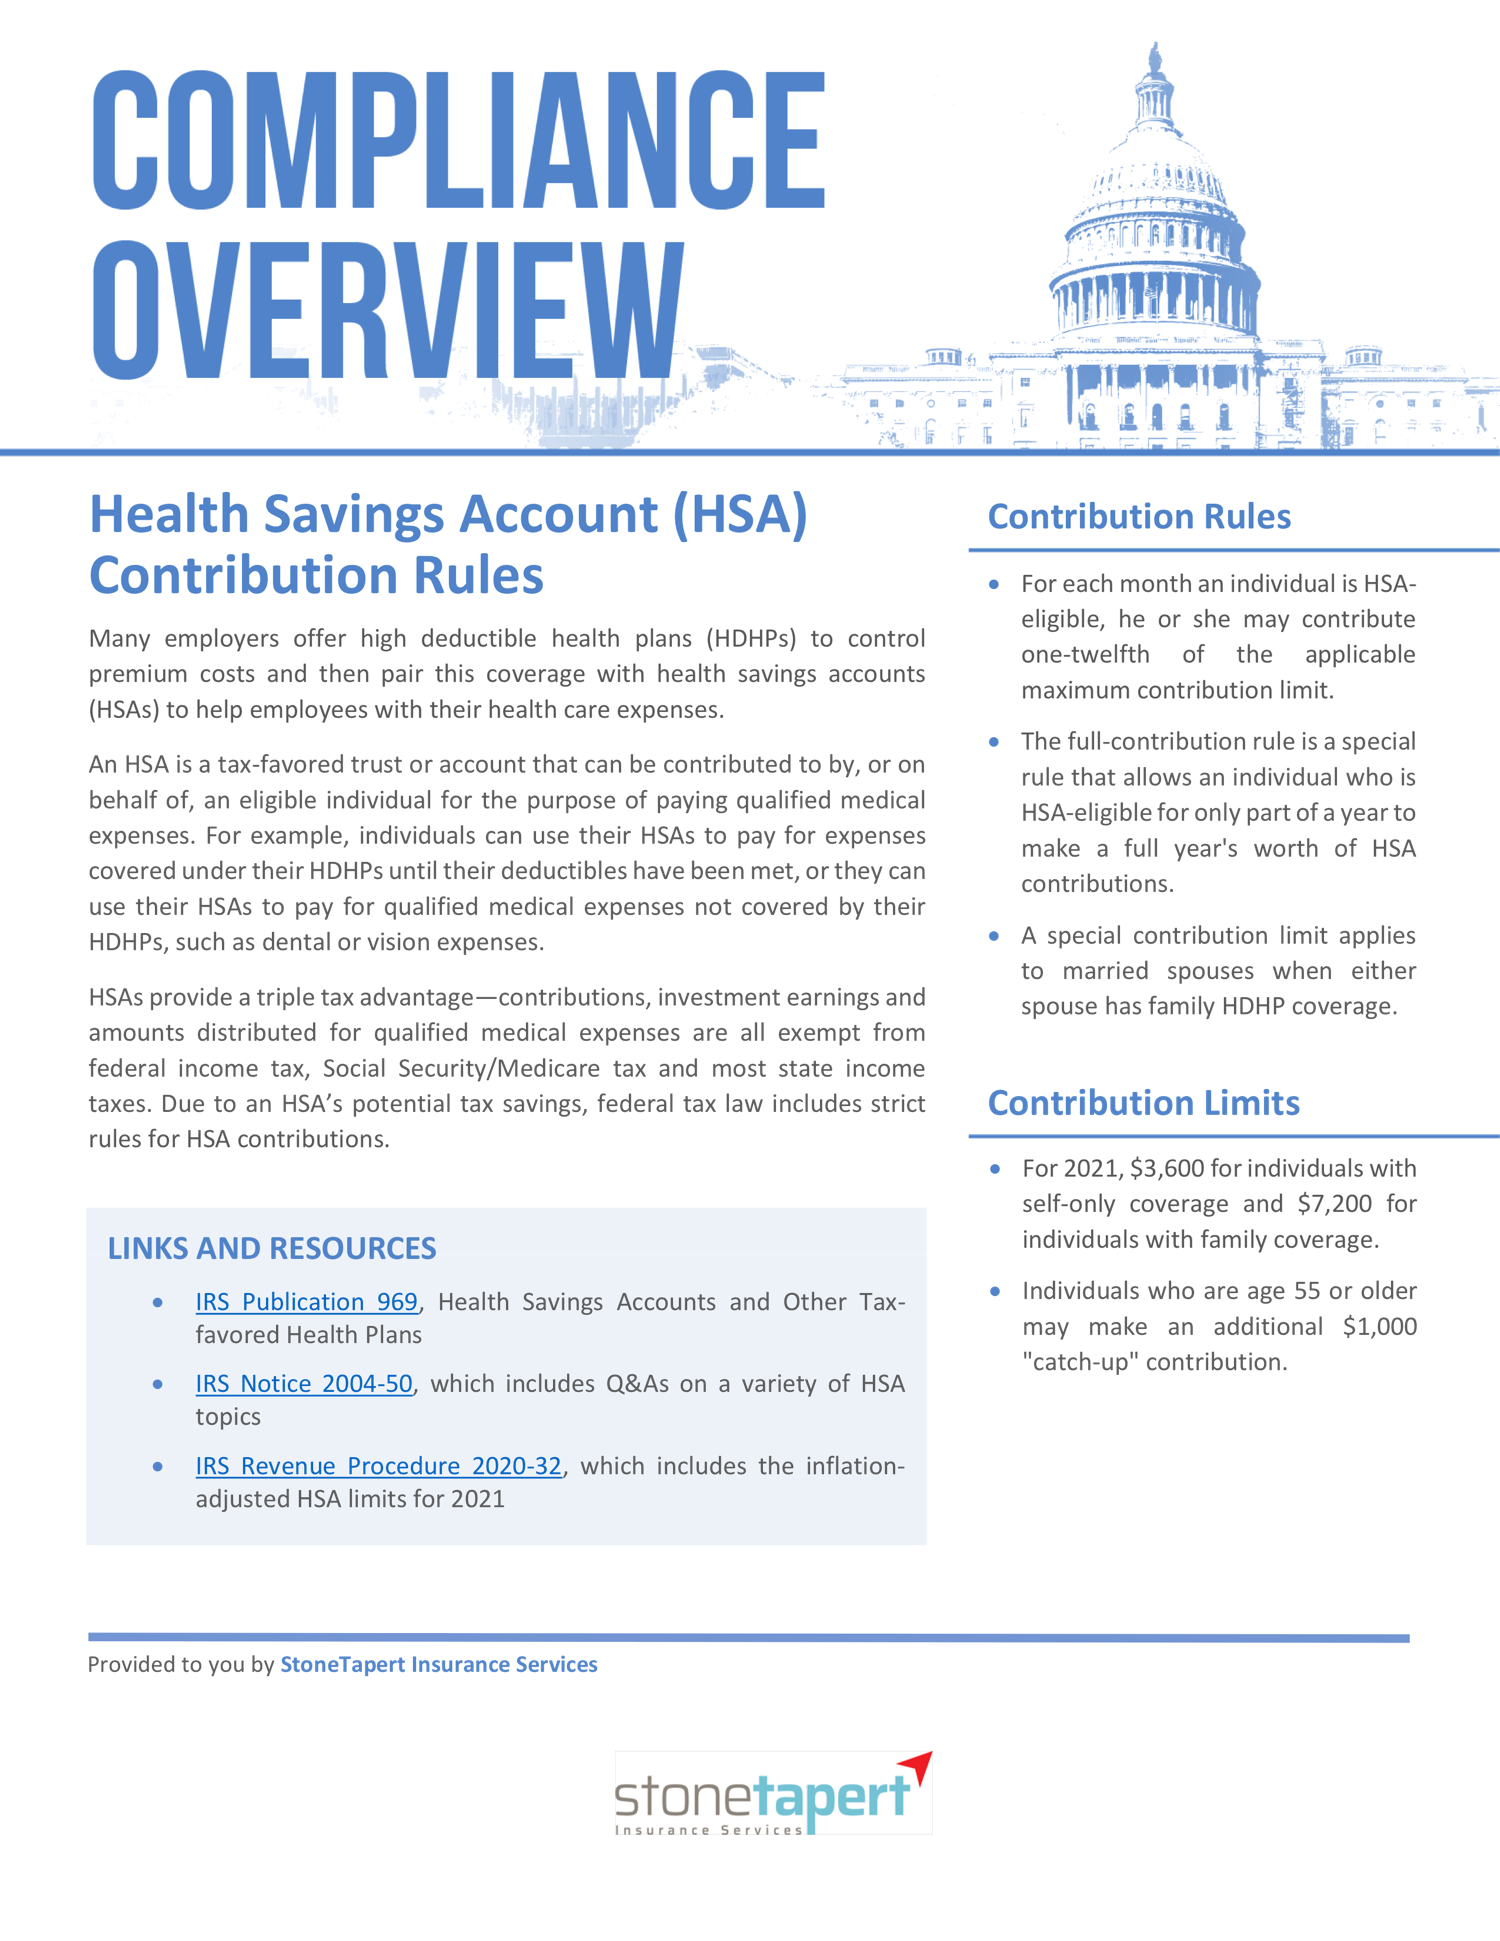 6 Requirements for Health Savings Account Participation